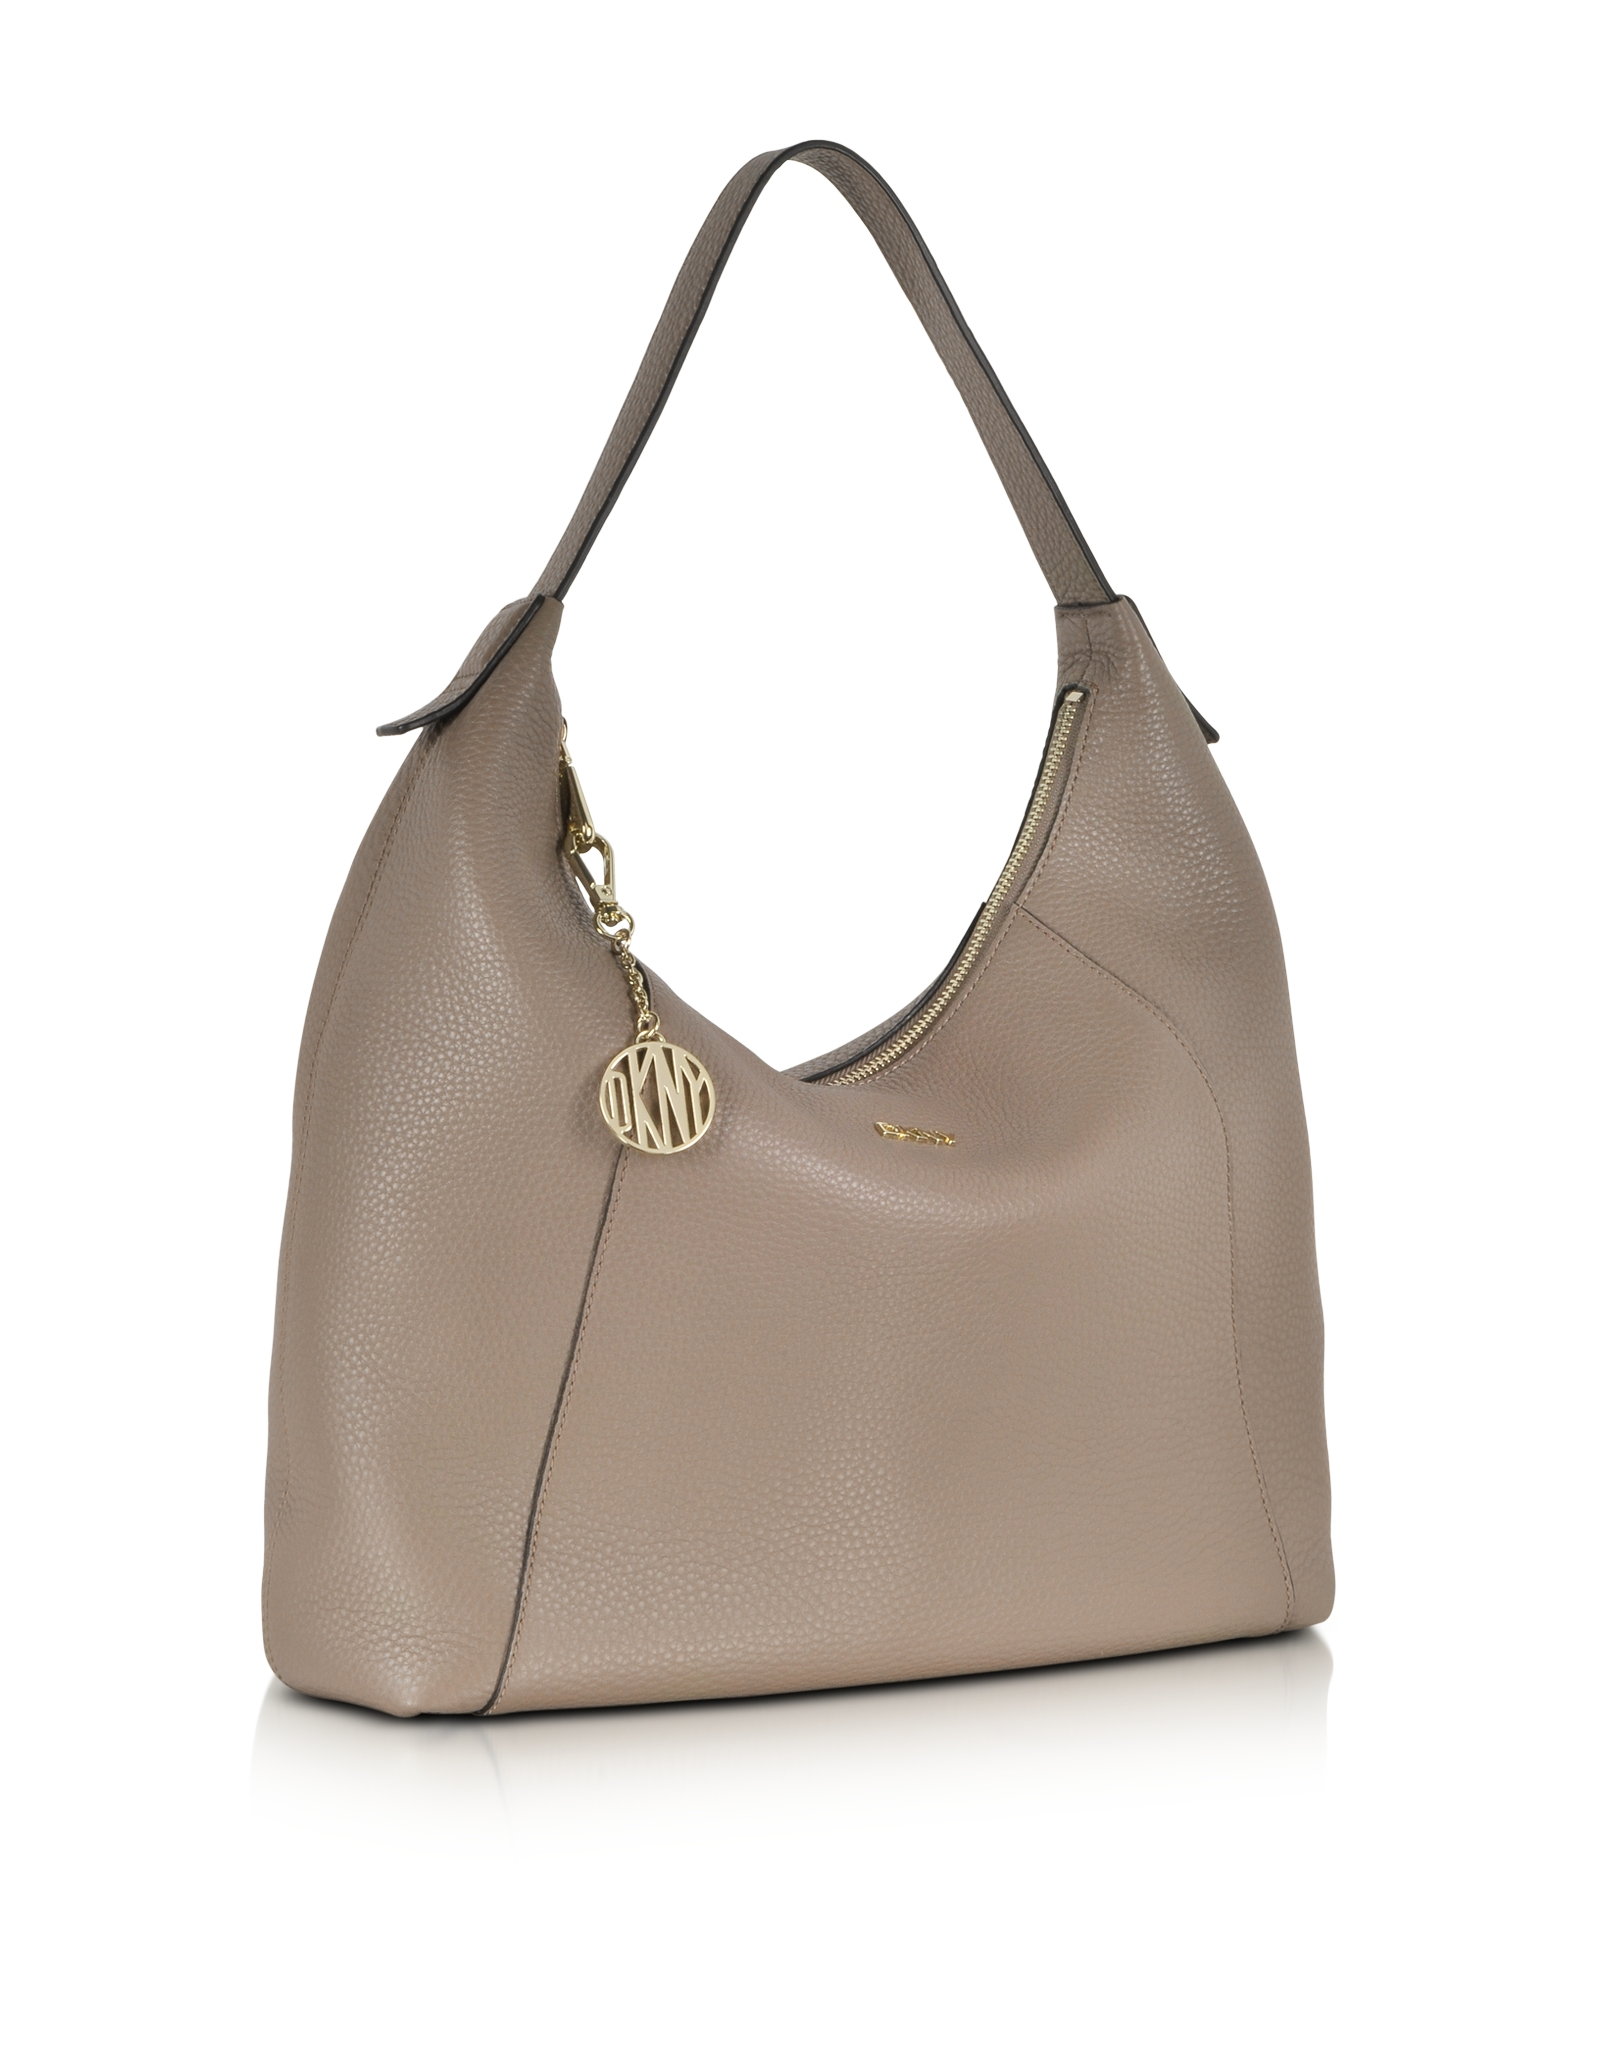 Lyst - Dkny Tribeca Leather Large Hobo Bag in Natural